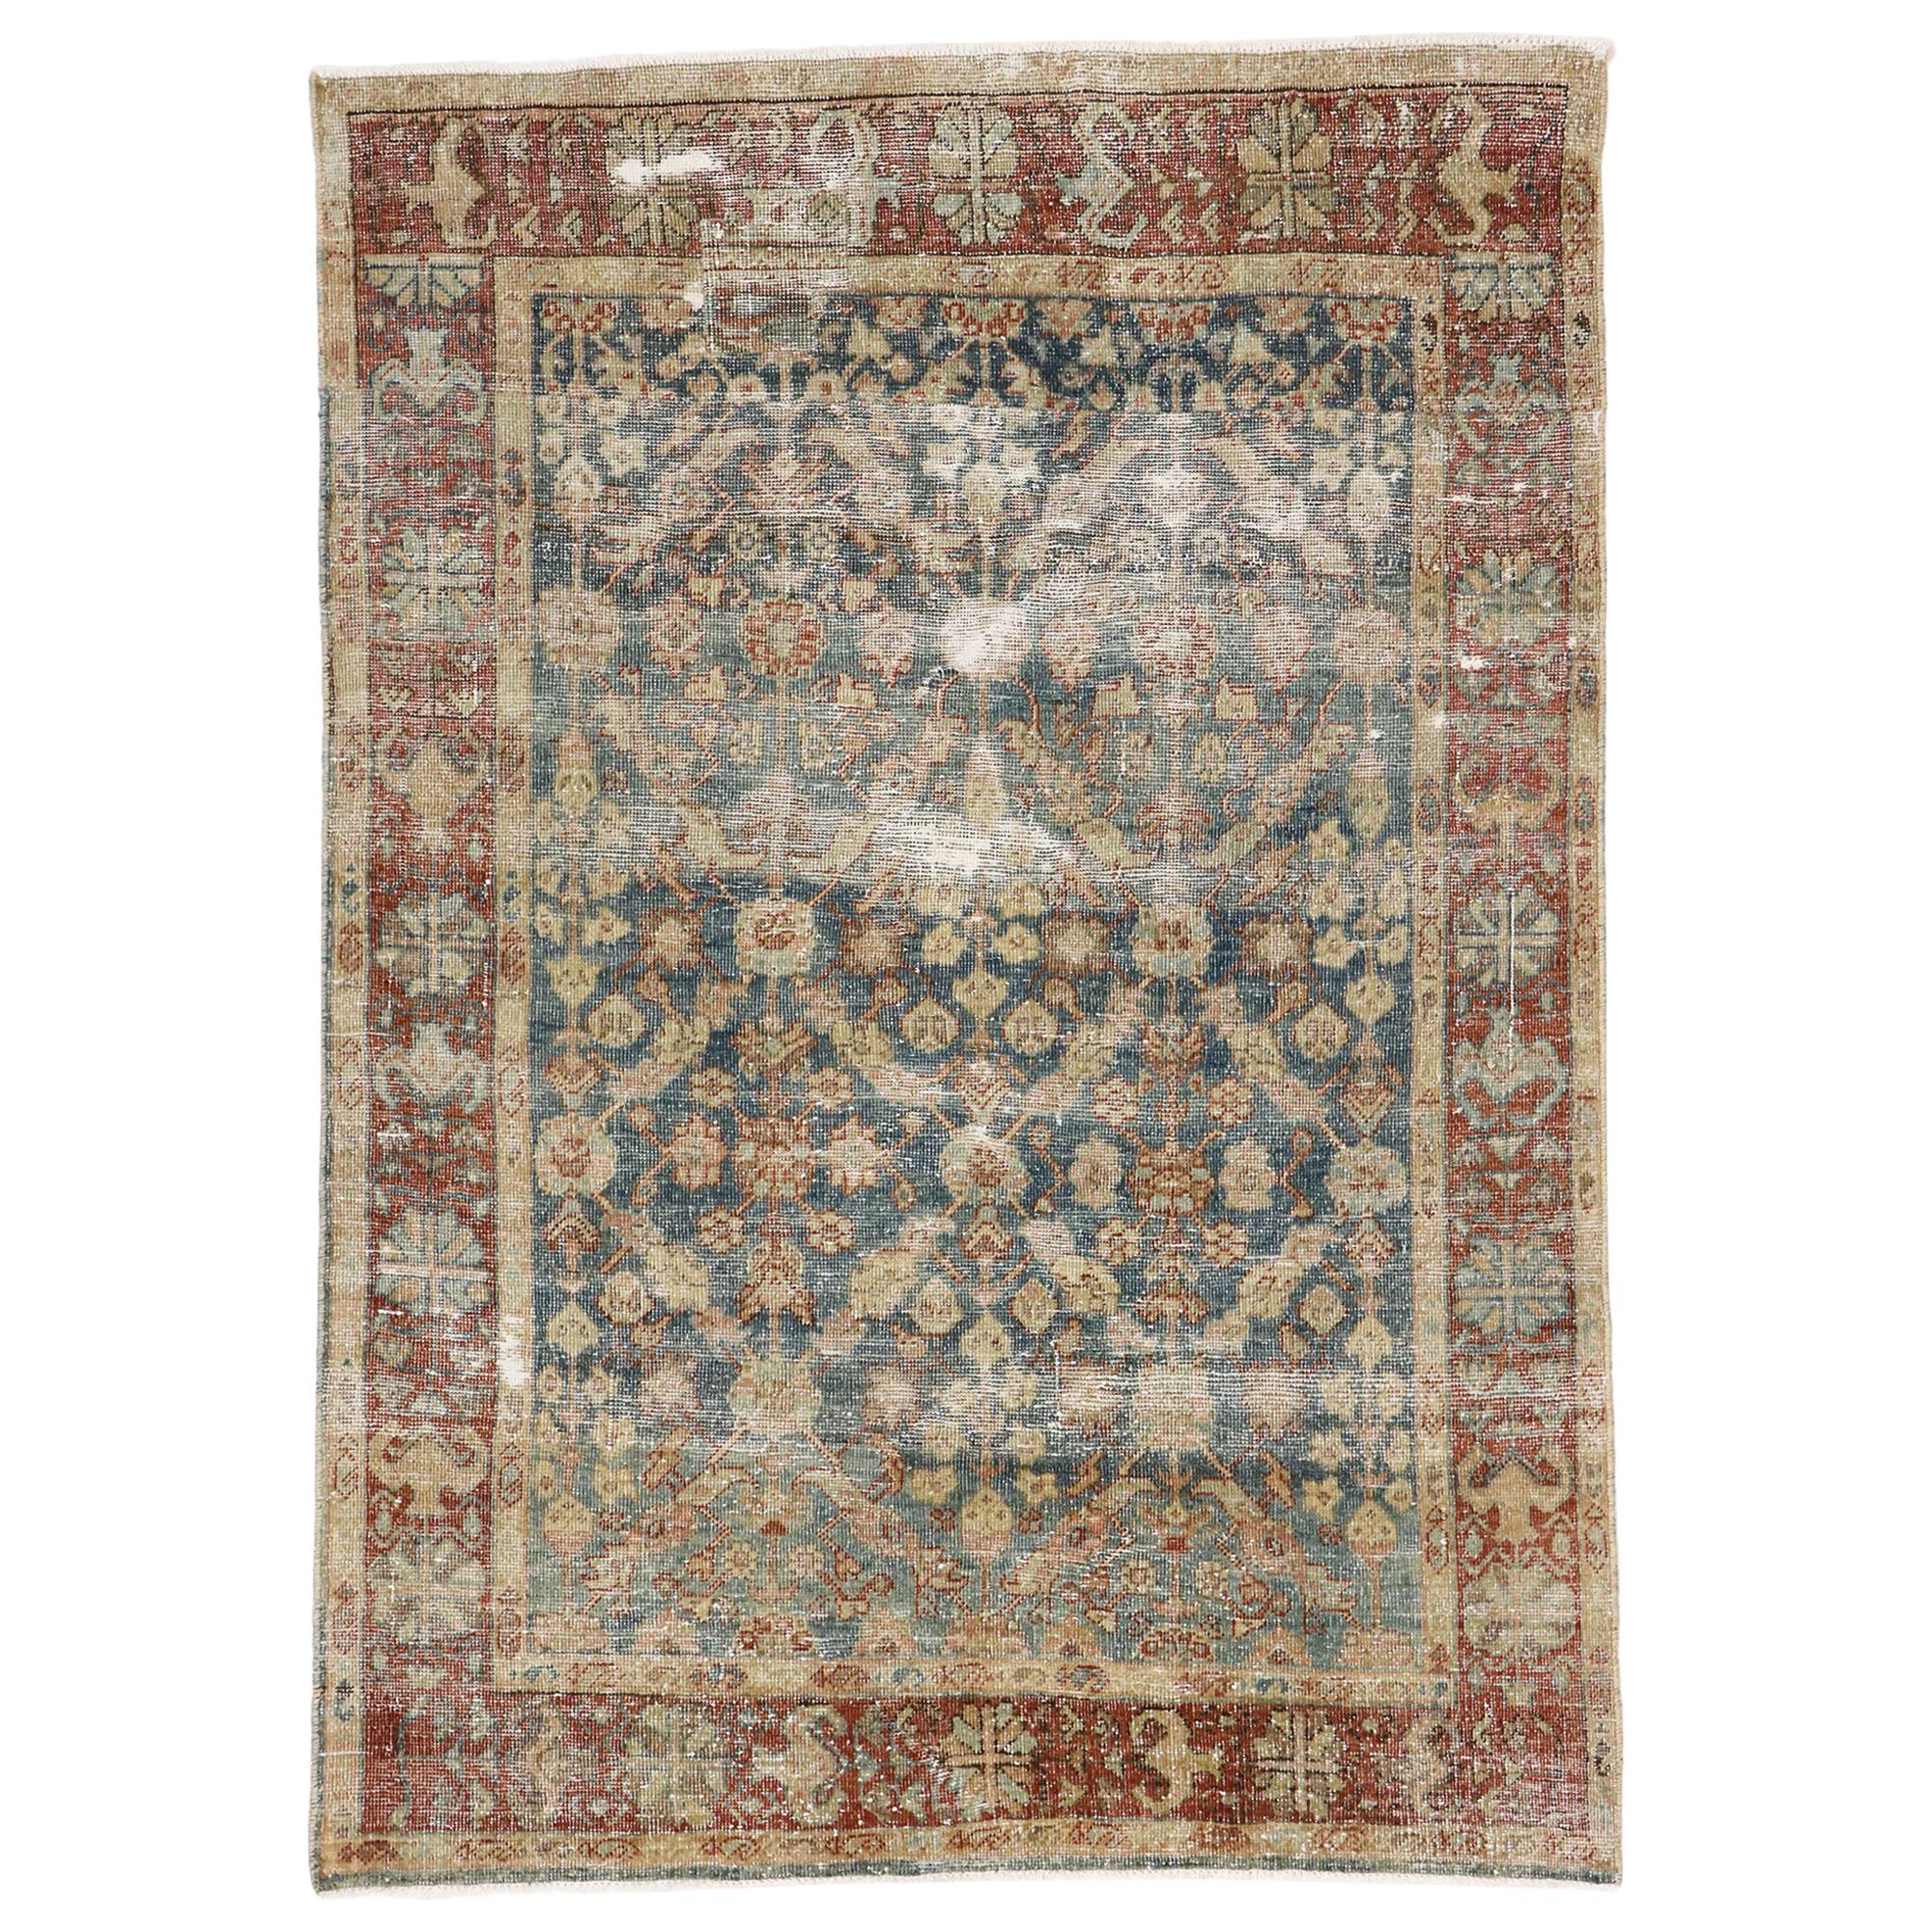 Distressed Antique Persian Mahal Rug with Rustic English Style For Sale